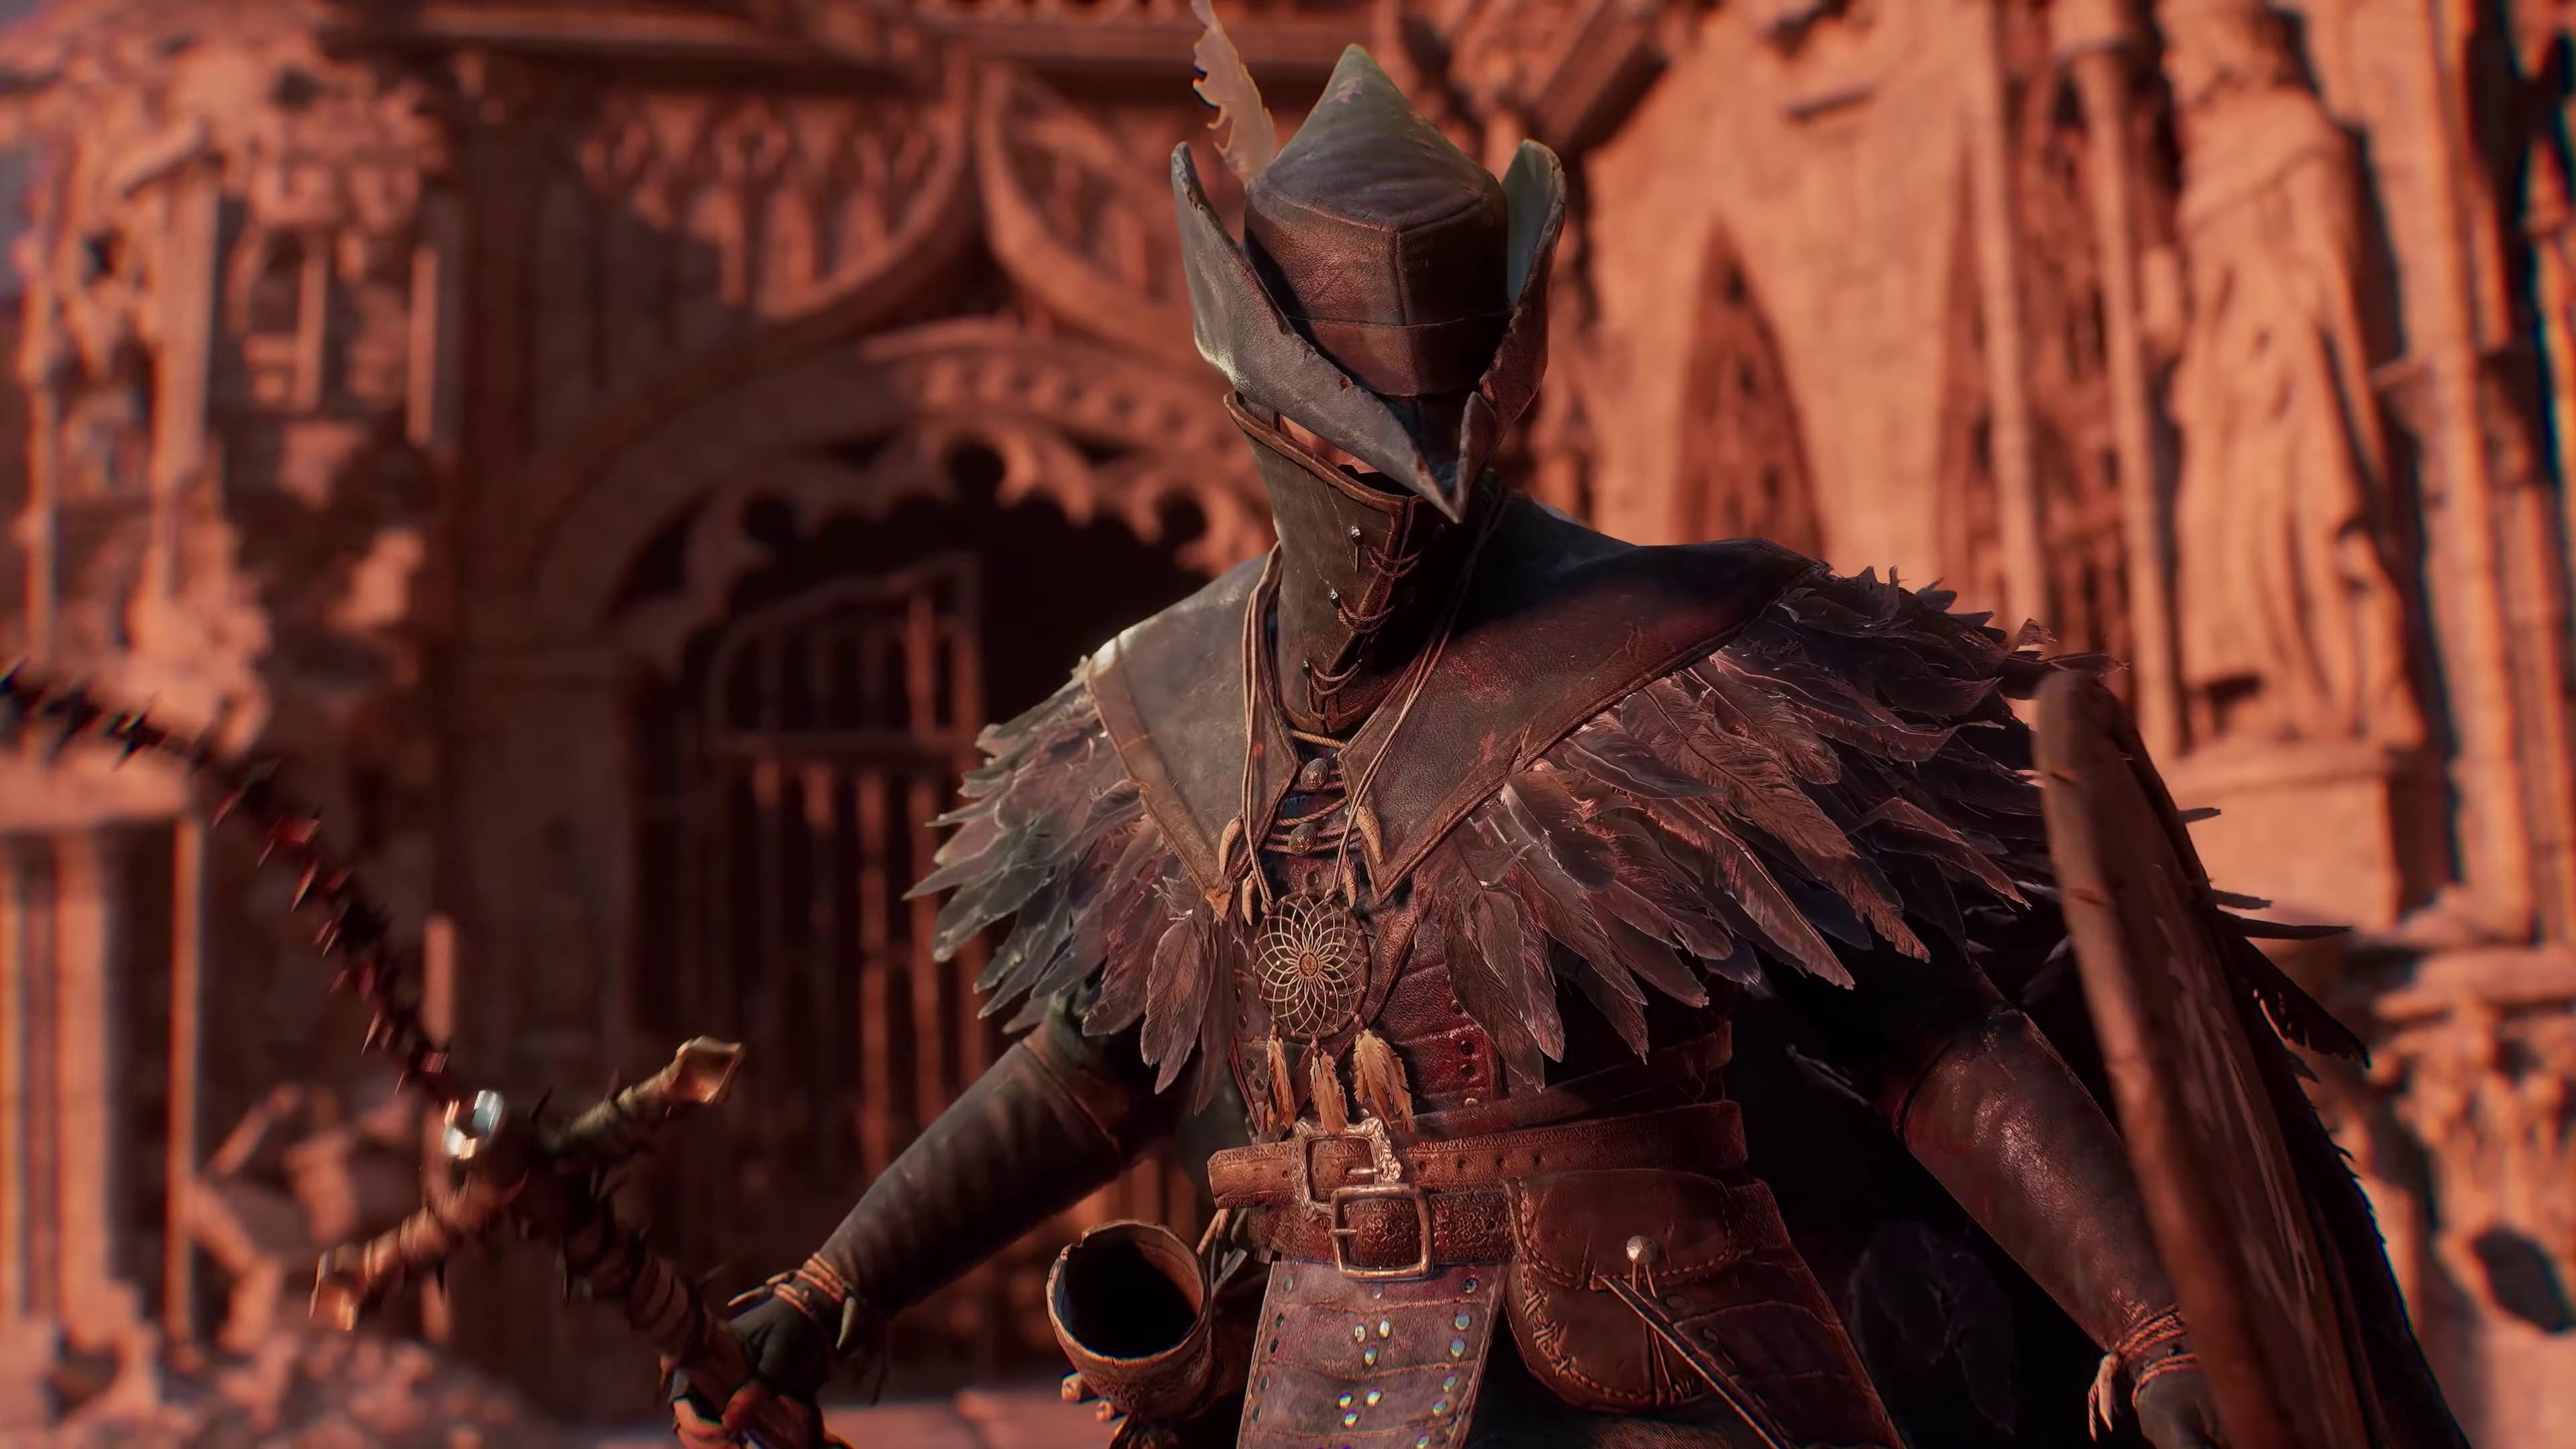 Hey Sony, it's time for Bloodborne to come to PC